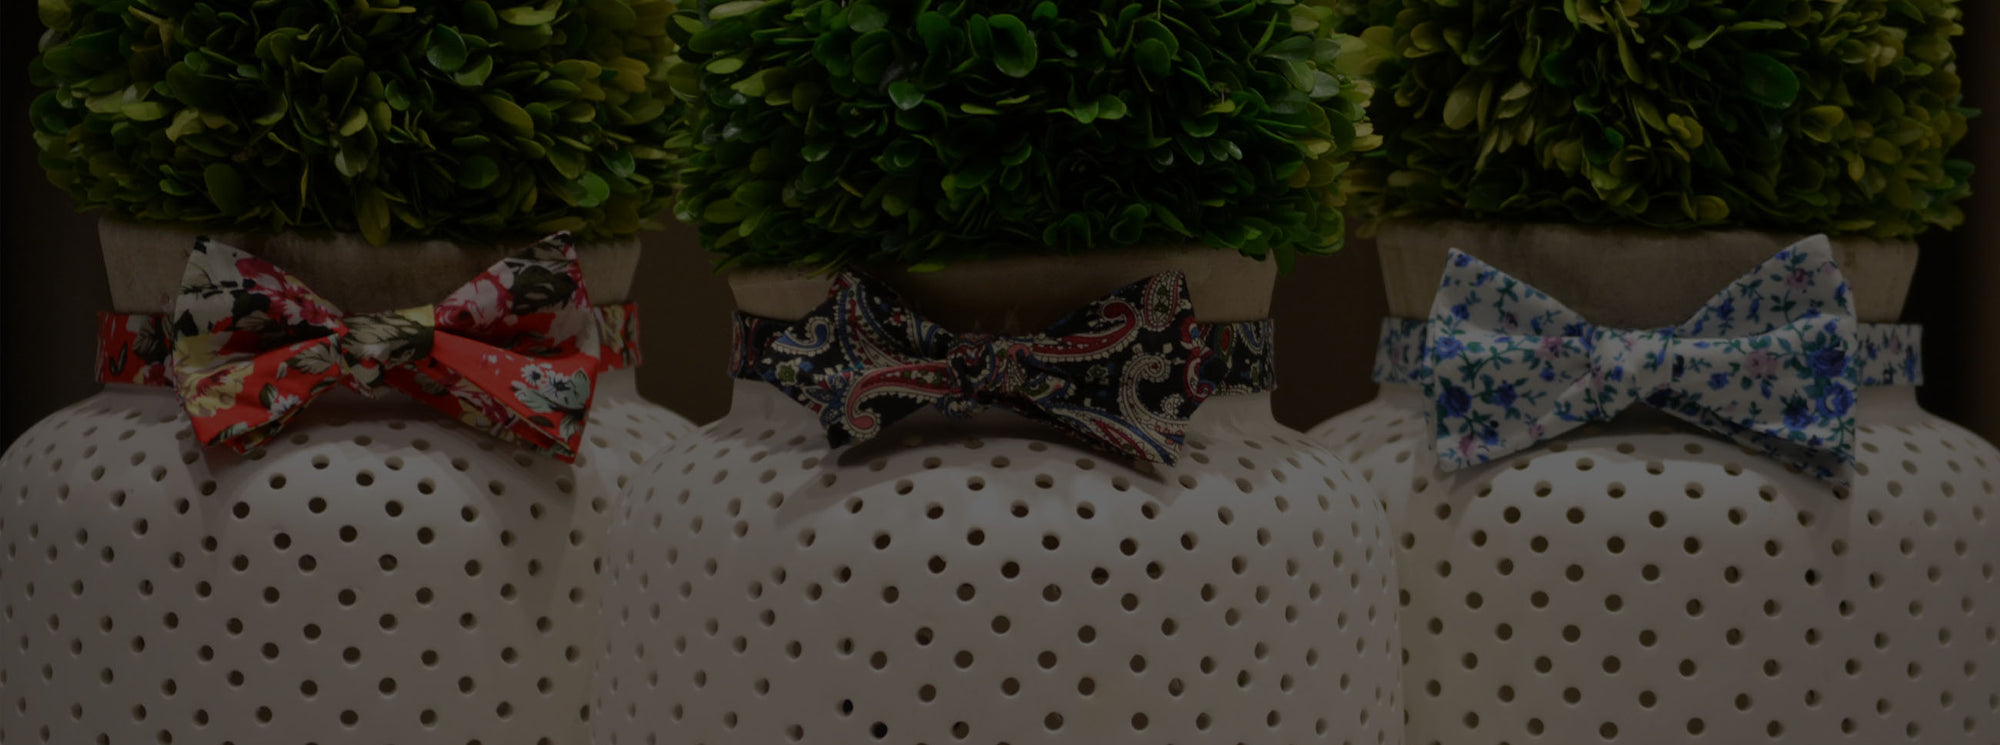 three different floral bow ties around plant vase